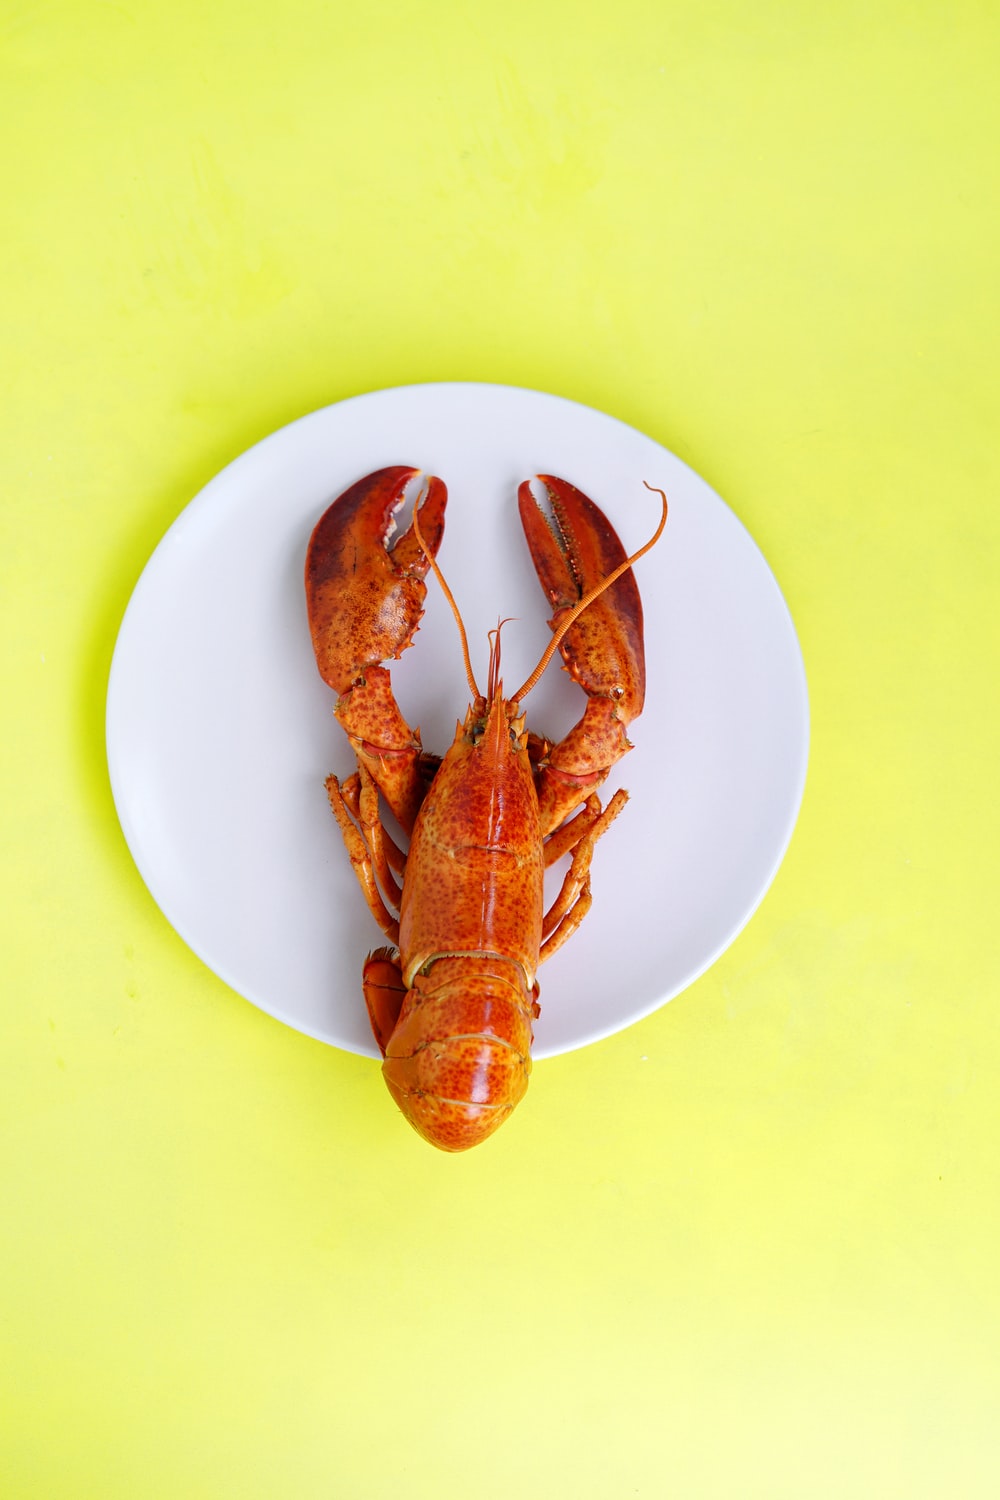 Lobster Picture. Download Free Image